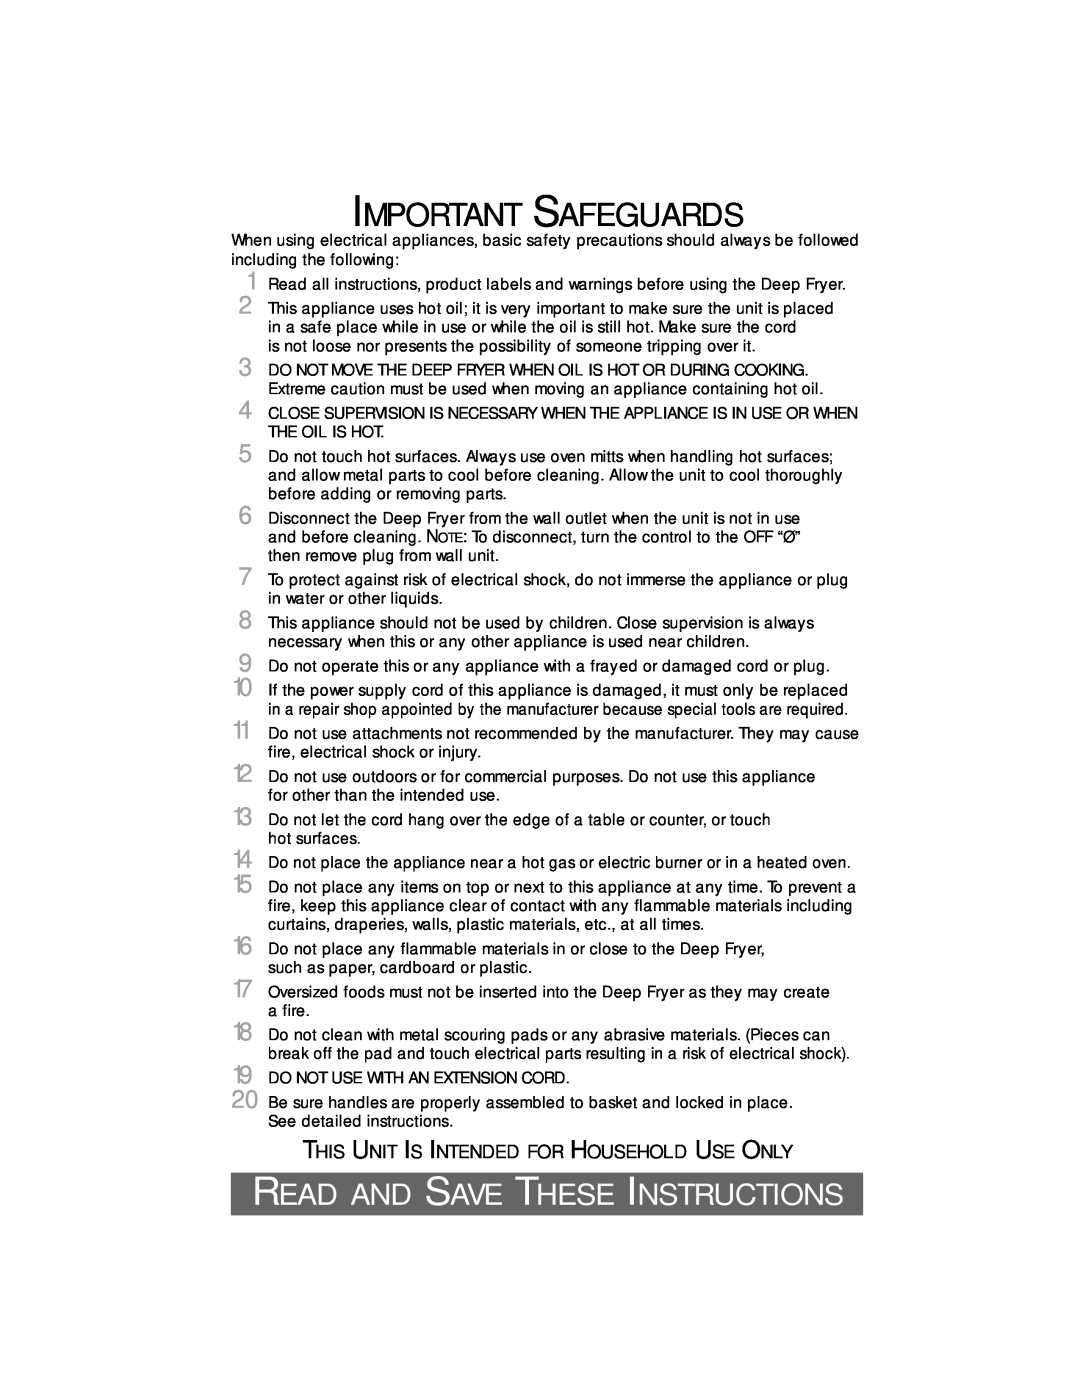 Sunbeam 3247, 3242 owner manual Important Safeguards, Read And Save These Instructions, 9 10, 14 15, 19 20 